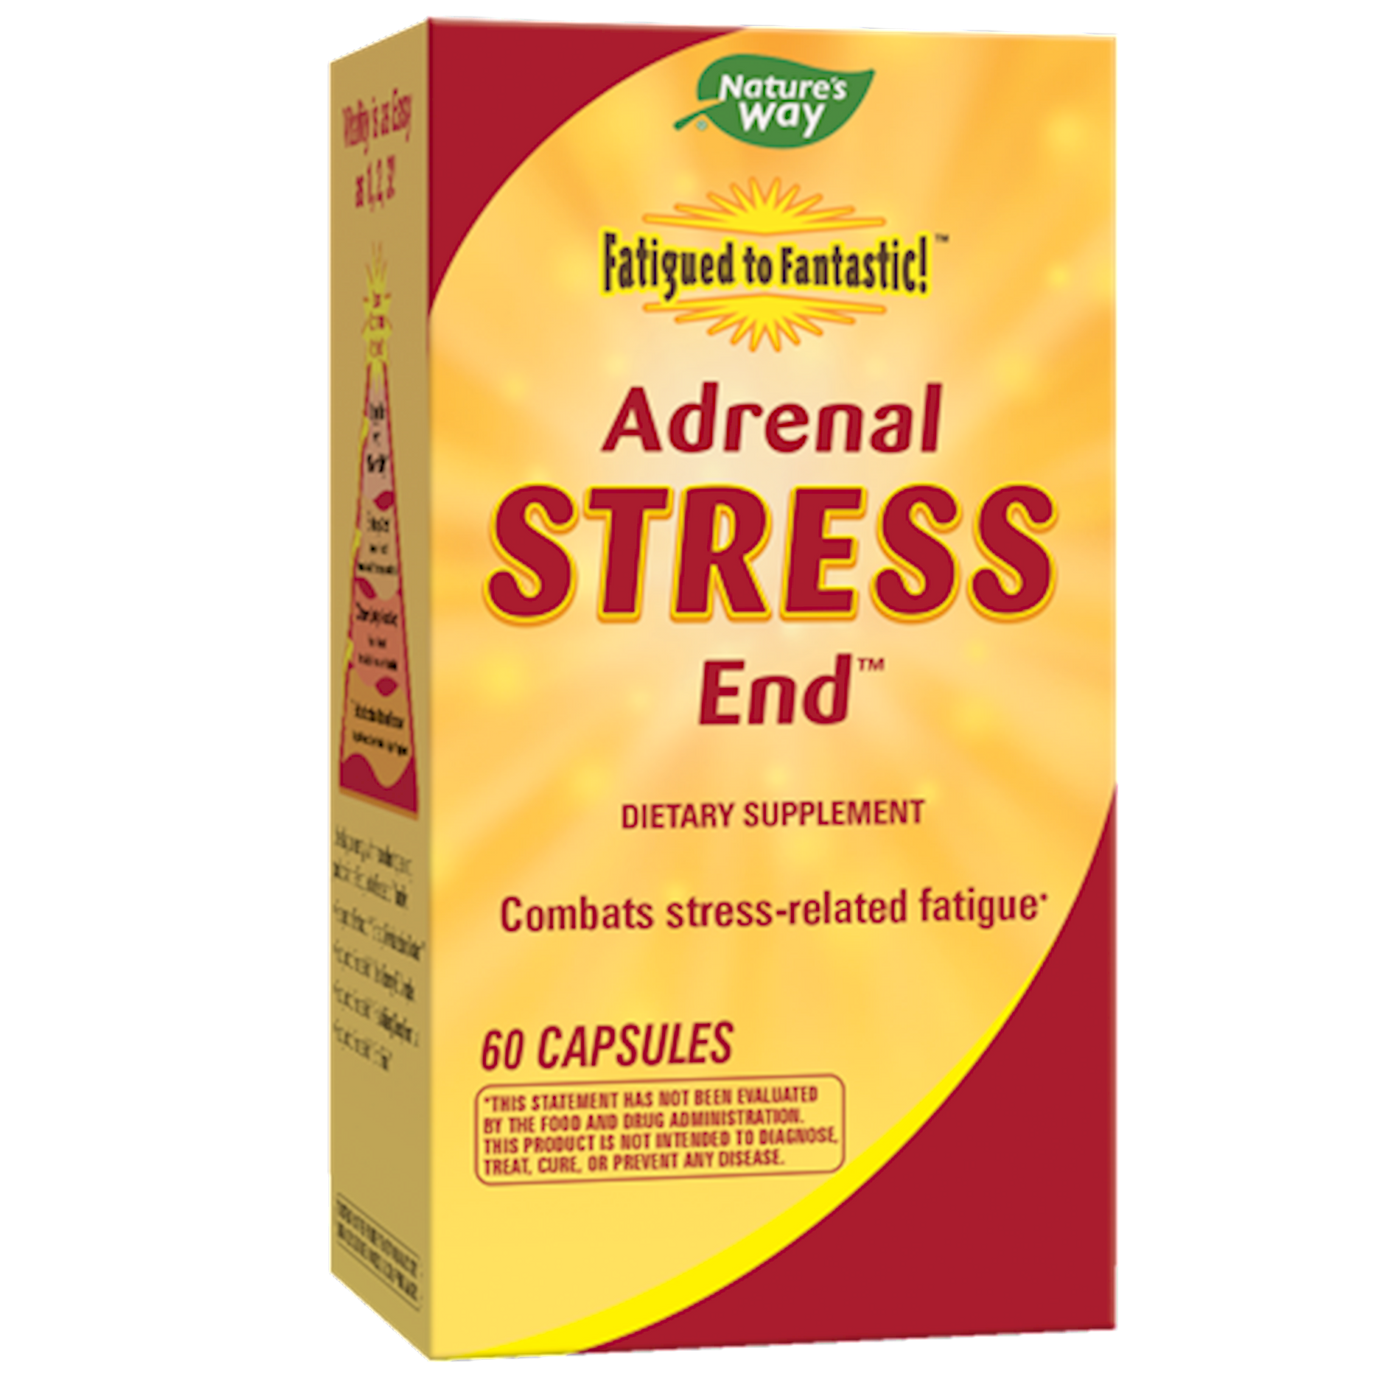 Fatigued/Fantastic Adrenal Stress 60caps Curated Wellness